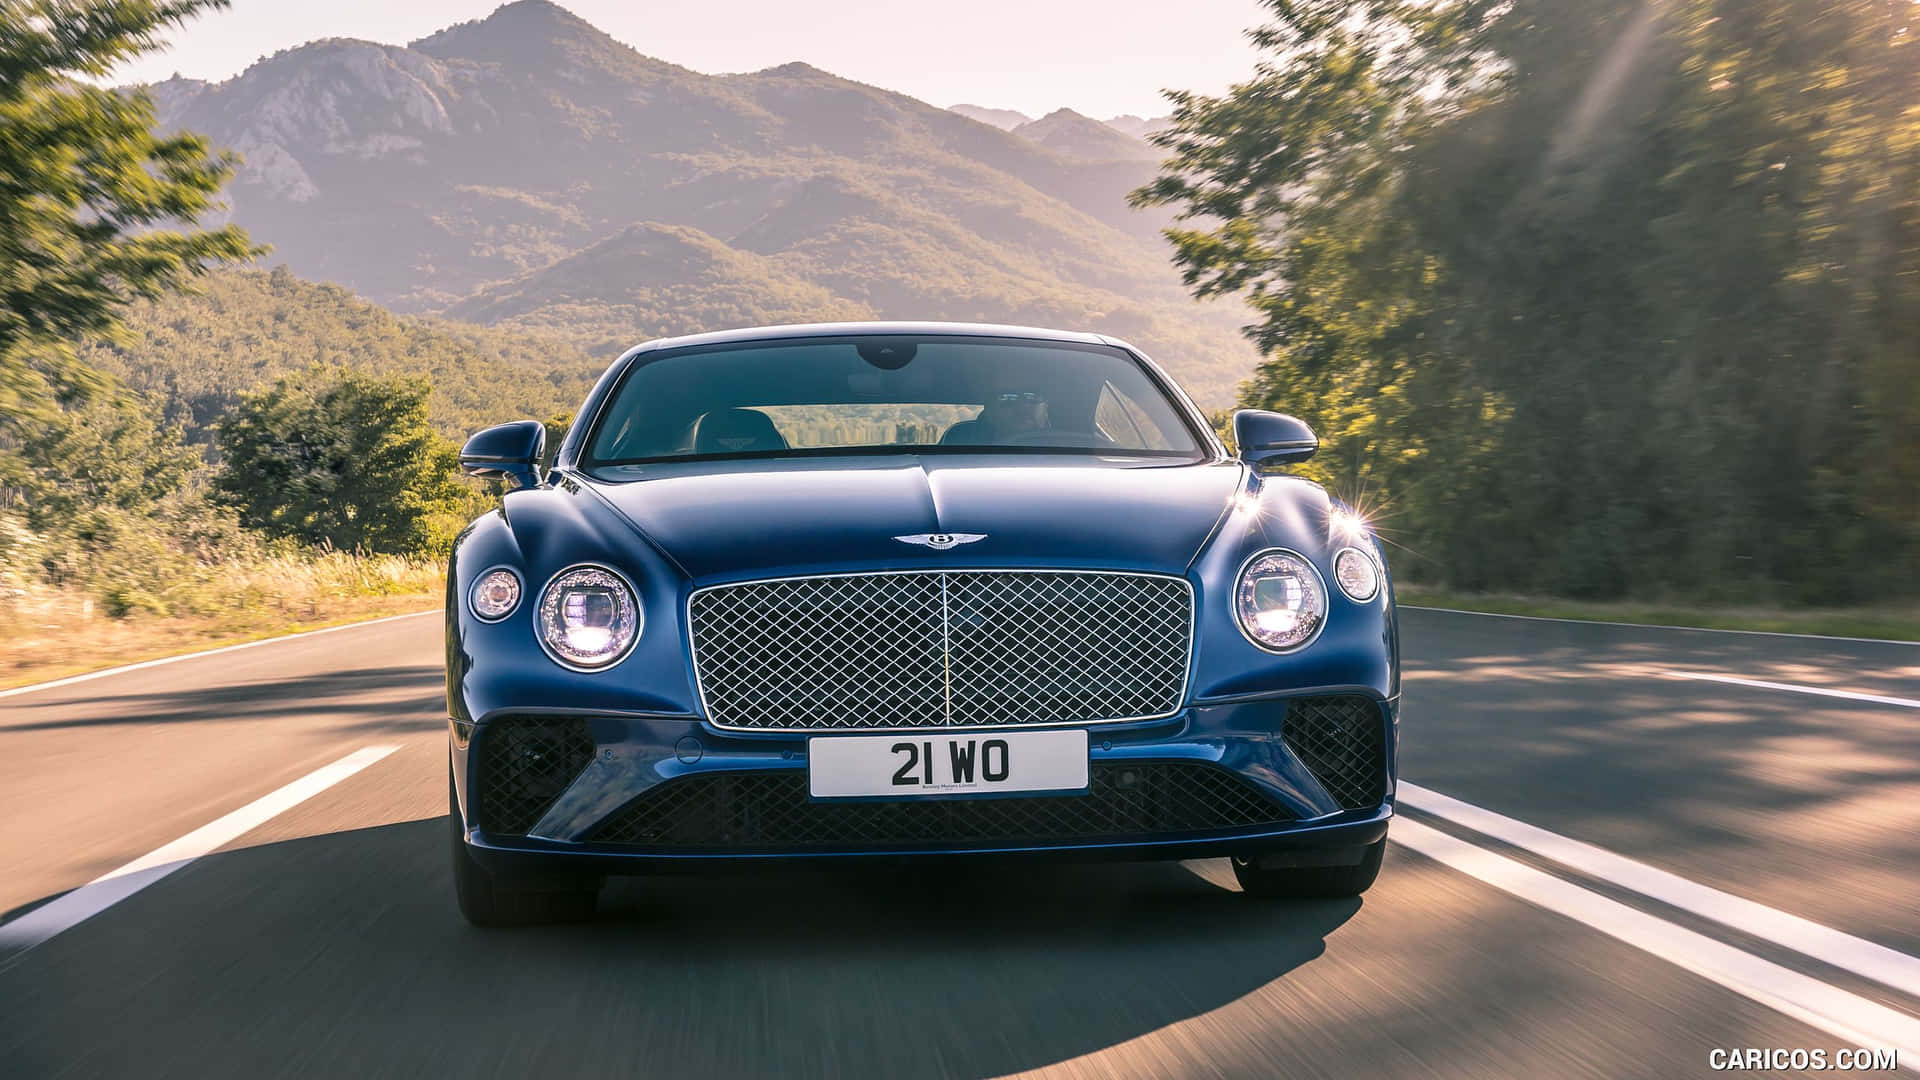 Travel In Luxury With A Bentley